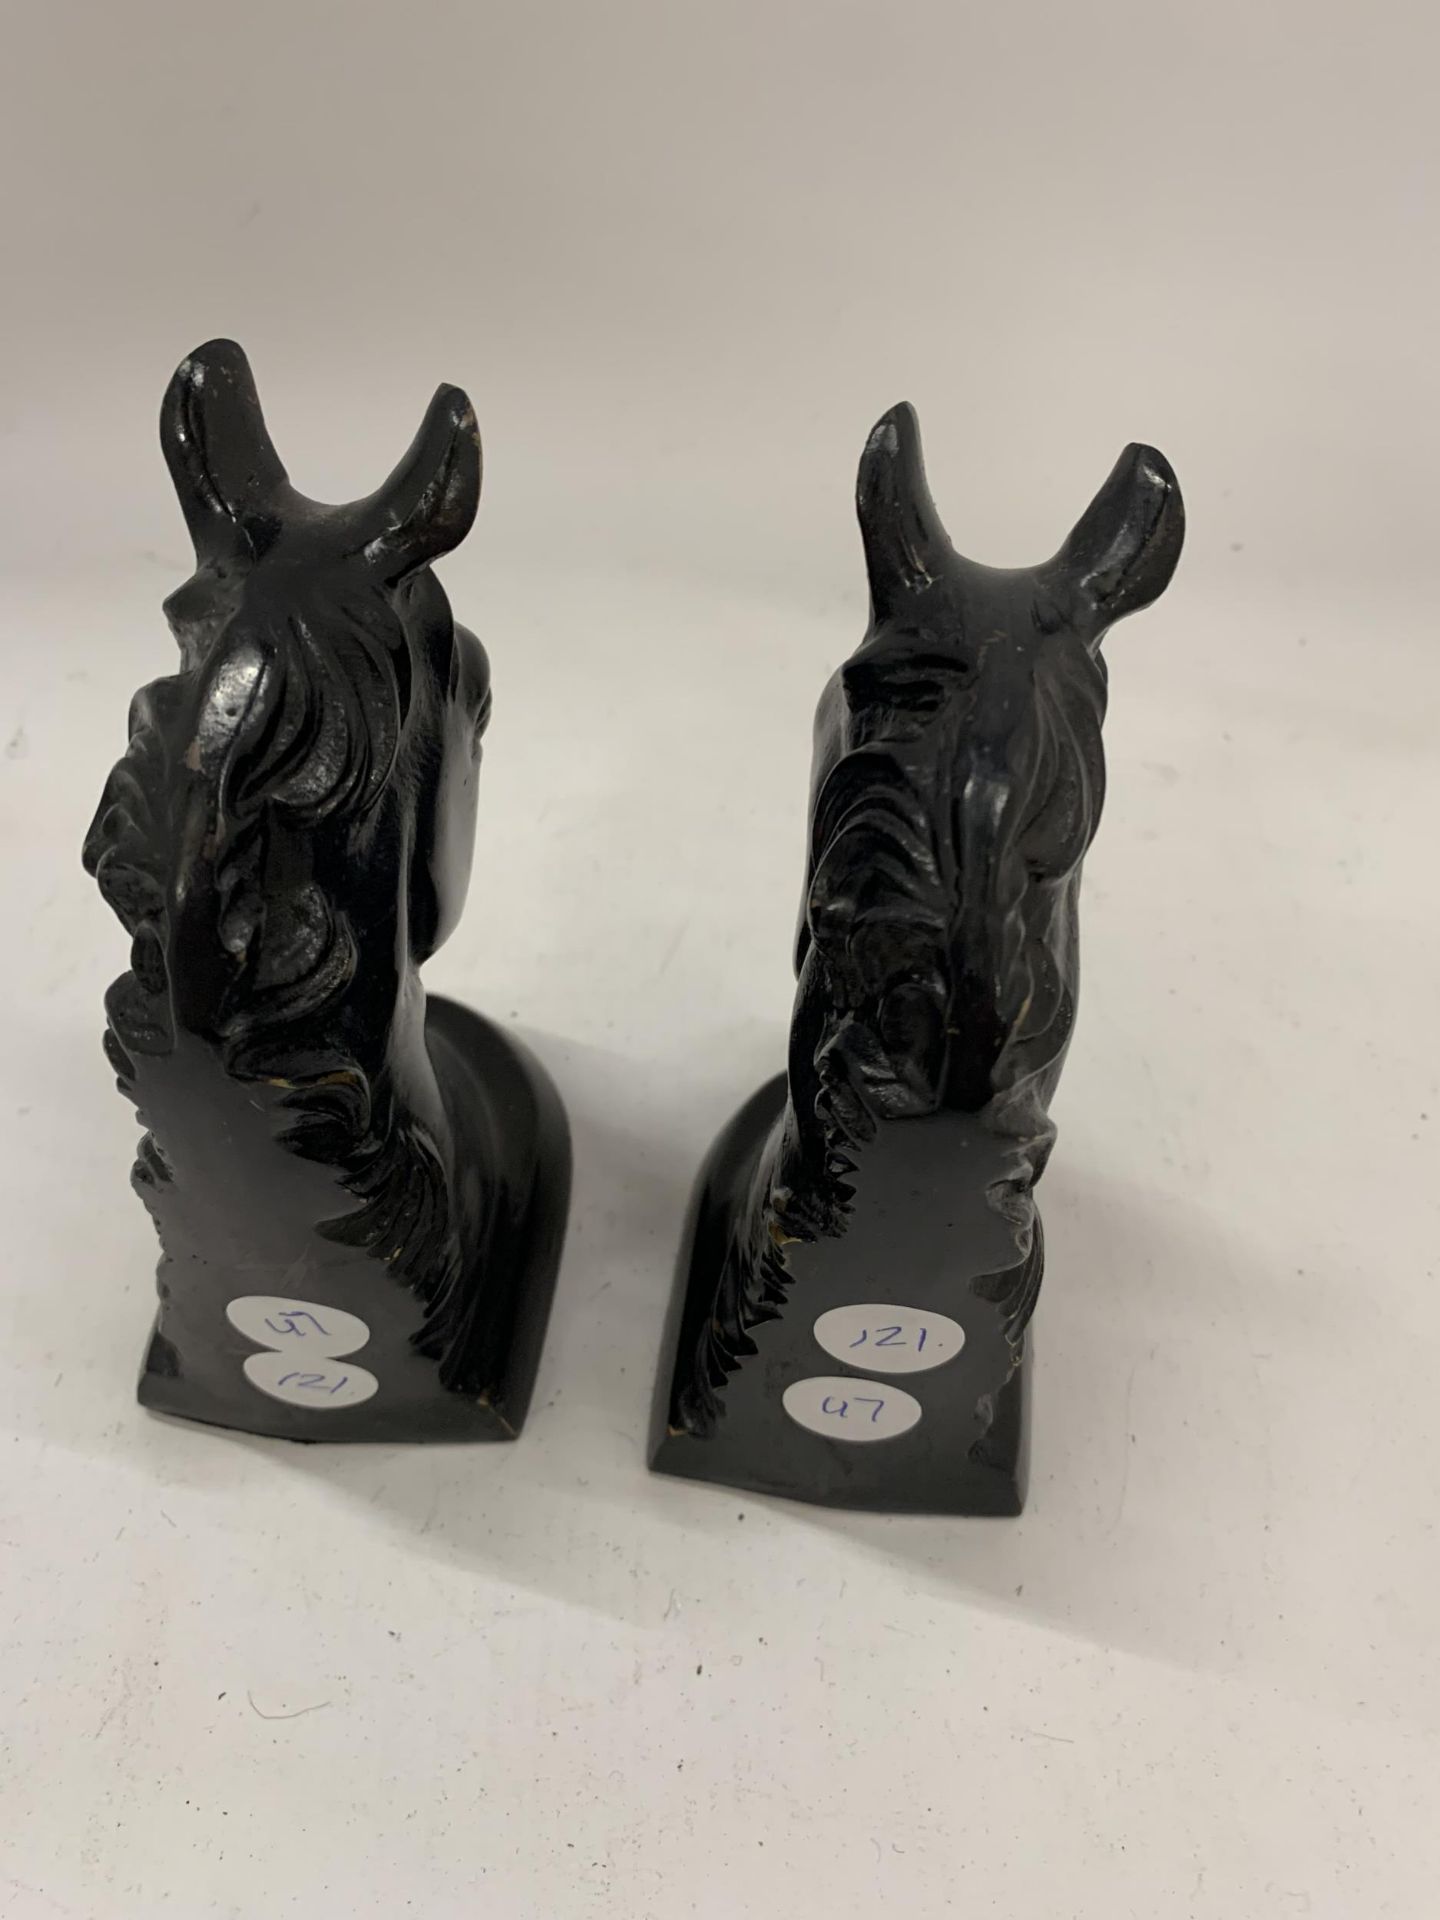 A PAIR OF STONE BLACK HORSES HEAD BOOK-ENDS HEIGHT 14CM - Image 5 of 8